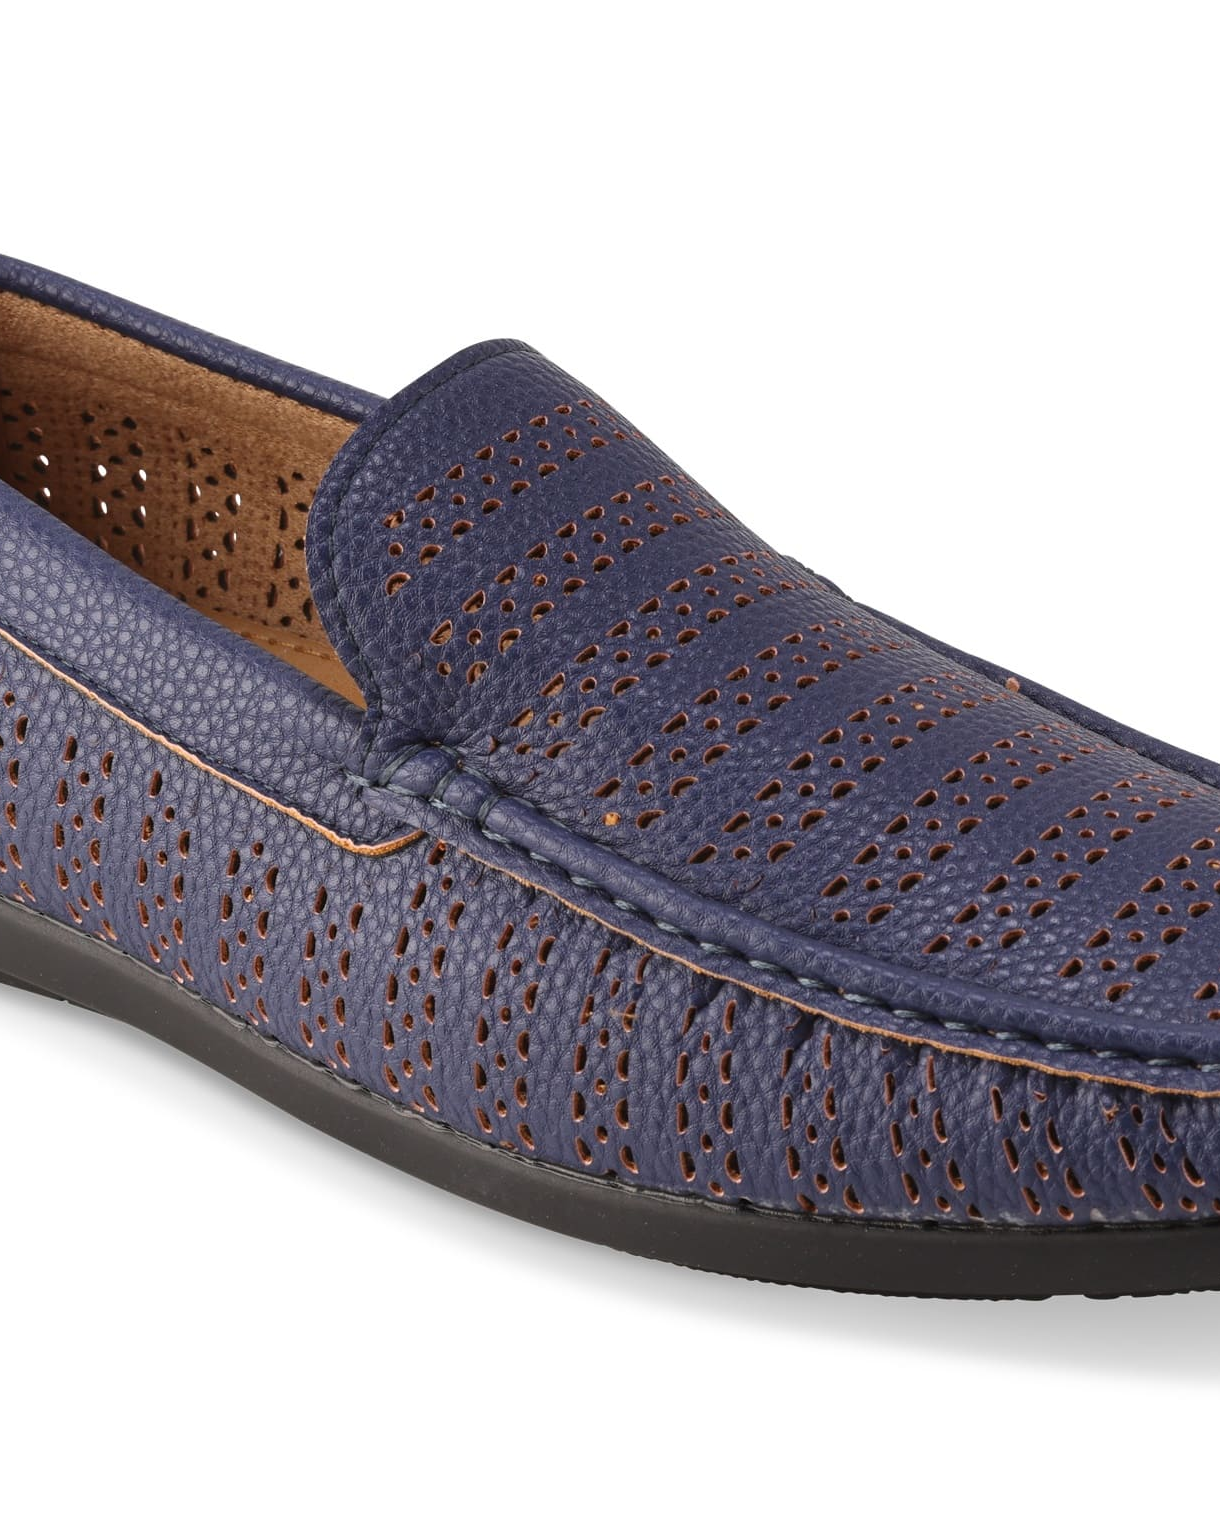 purple loafer shoes